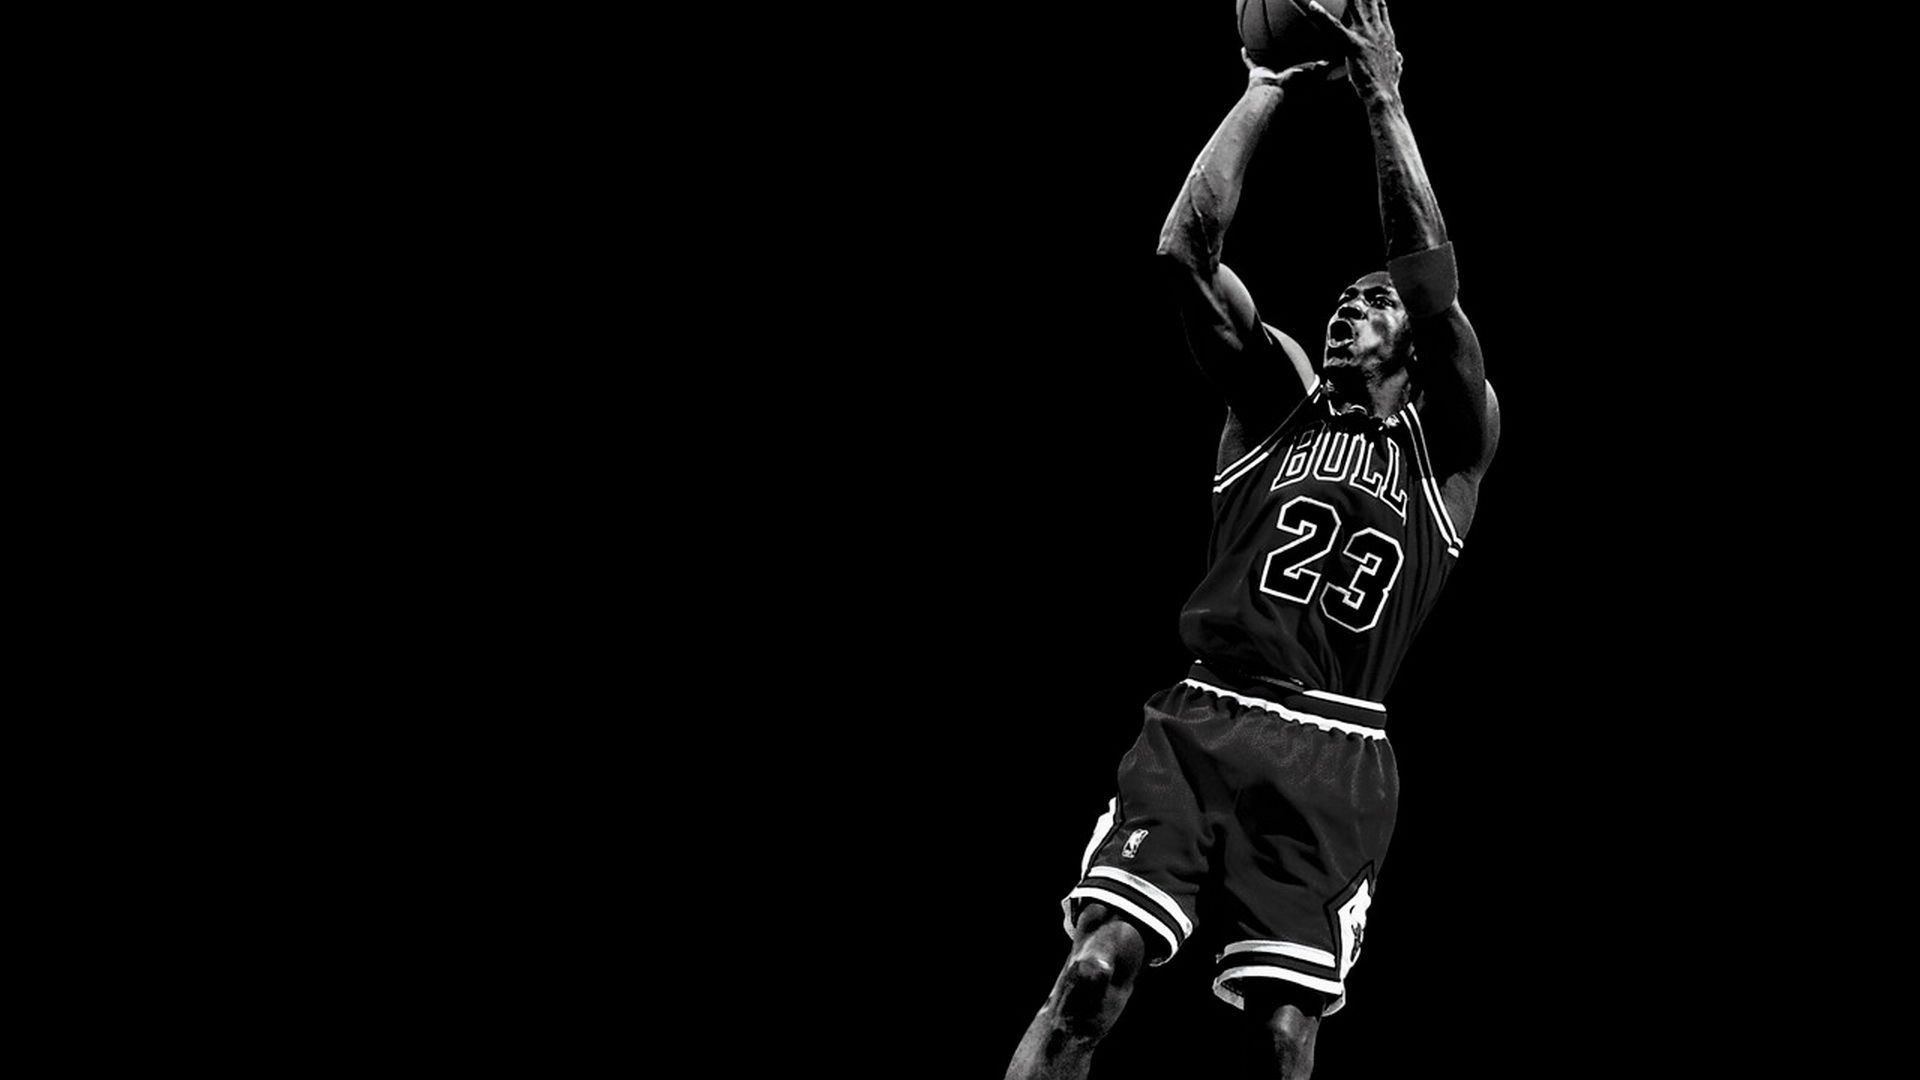 1920x1080 ... Jordan HD Wallpapers new collection 2 ...